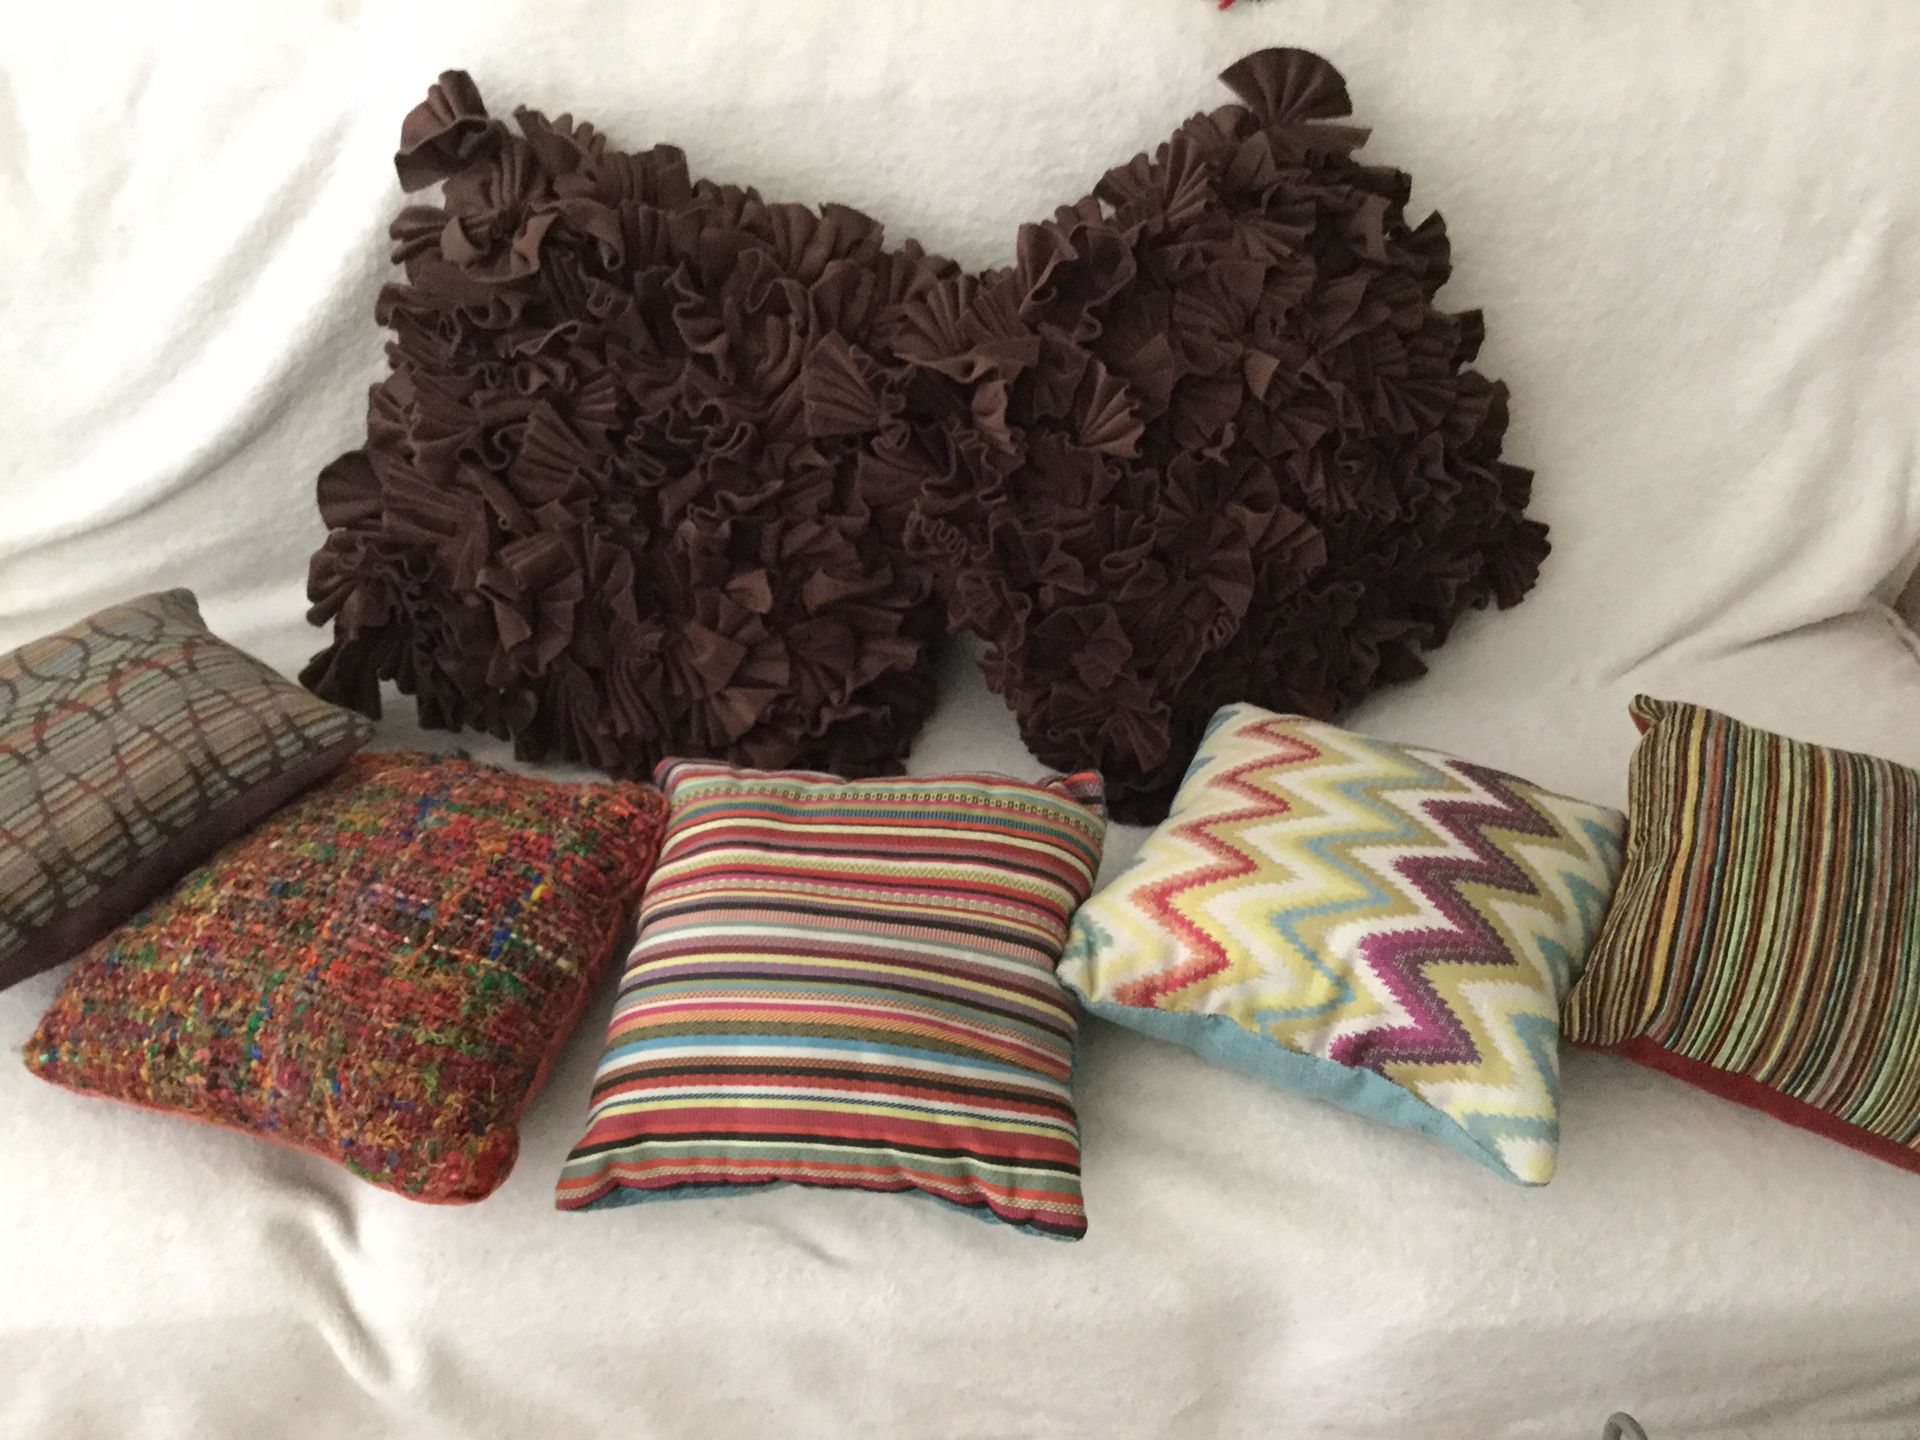 Decorative pillows-$5 for ALL pillows together